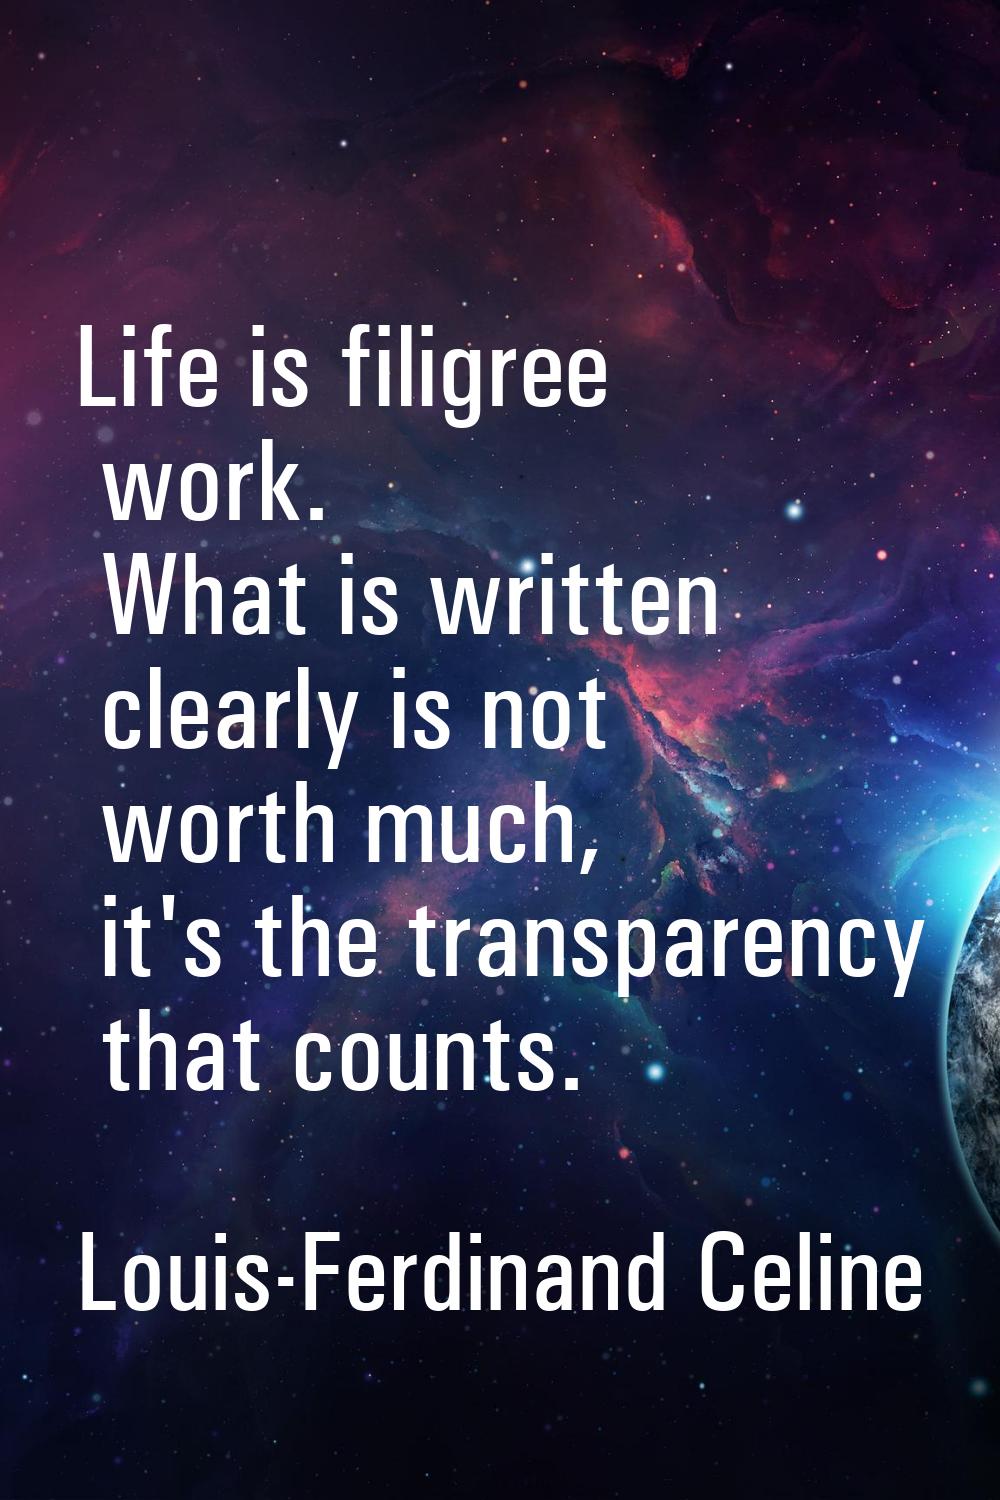 Life is filigree work. What is written clearly is not worth much, it's the transparency that counts